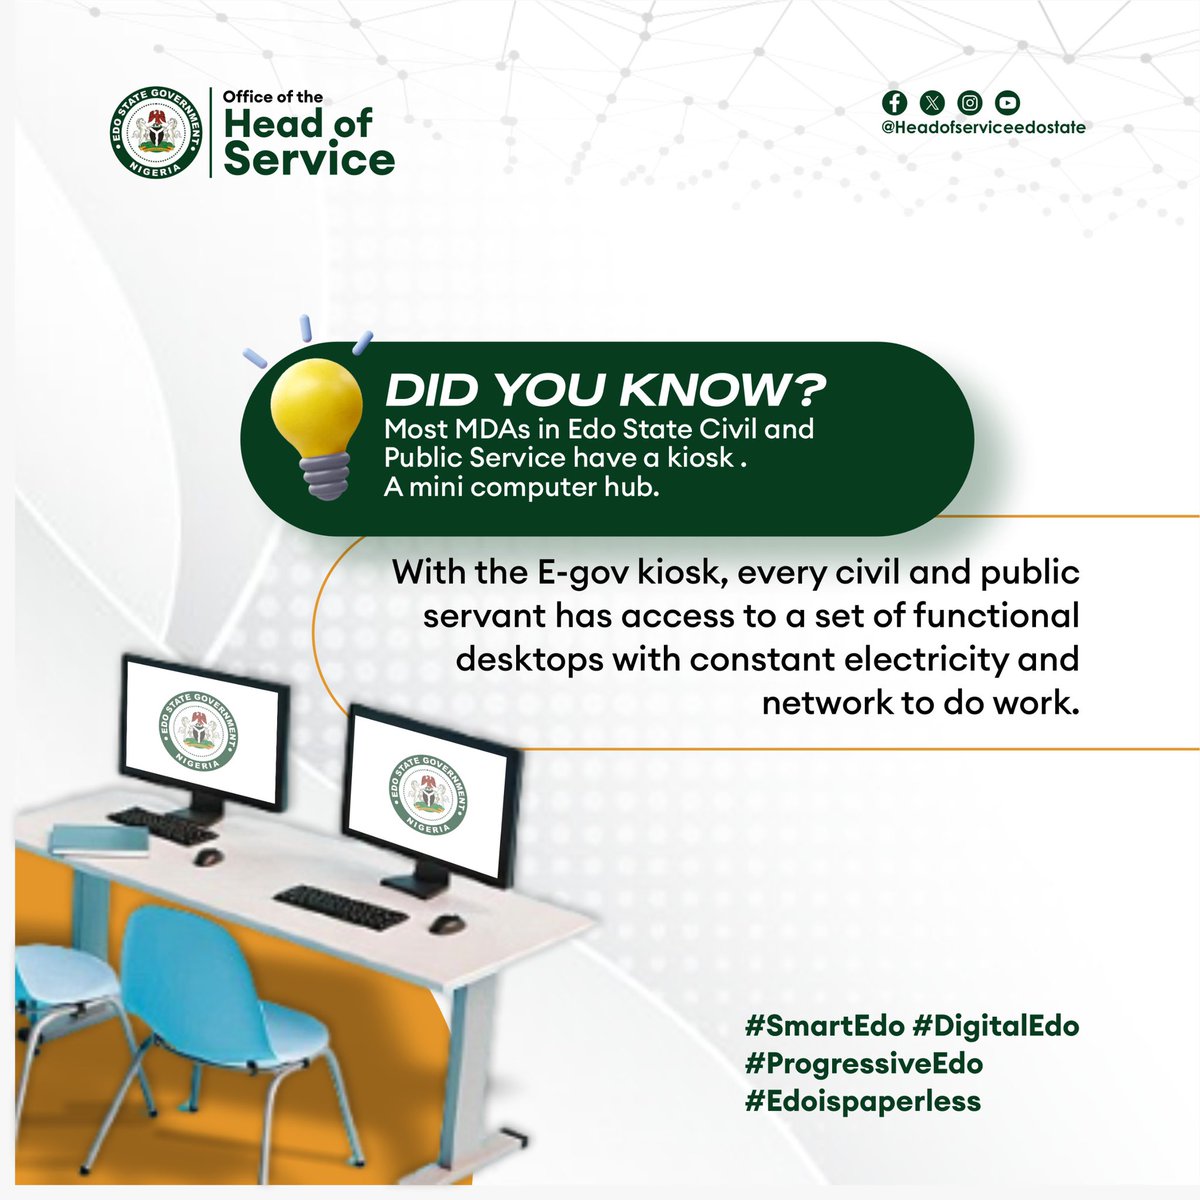 Today, there are Egov kiosks stationed in many MDAs in Edo State Civil and Public Service. With the Egov kiosk, Civil and public servants have access to desktop computers and the internet to do work. 

#Edoispaperless #Egov #Edogov #SmartEdo #DigitalEdo